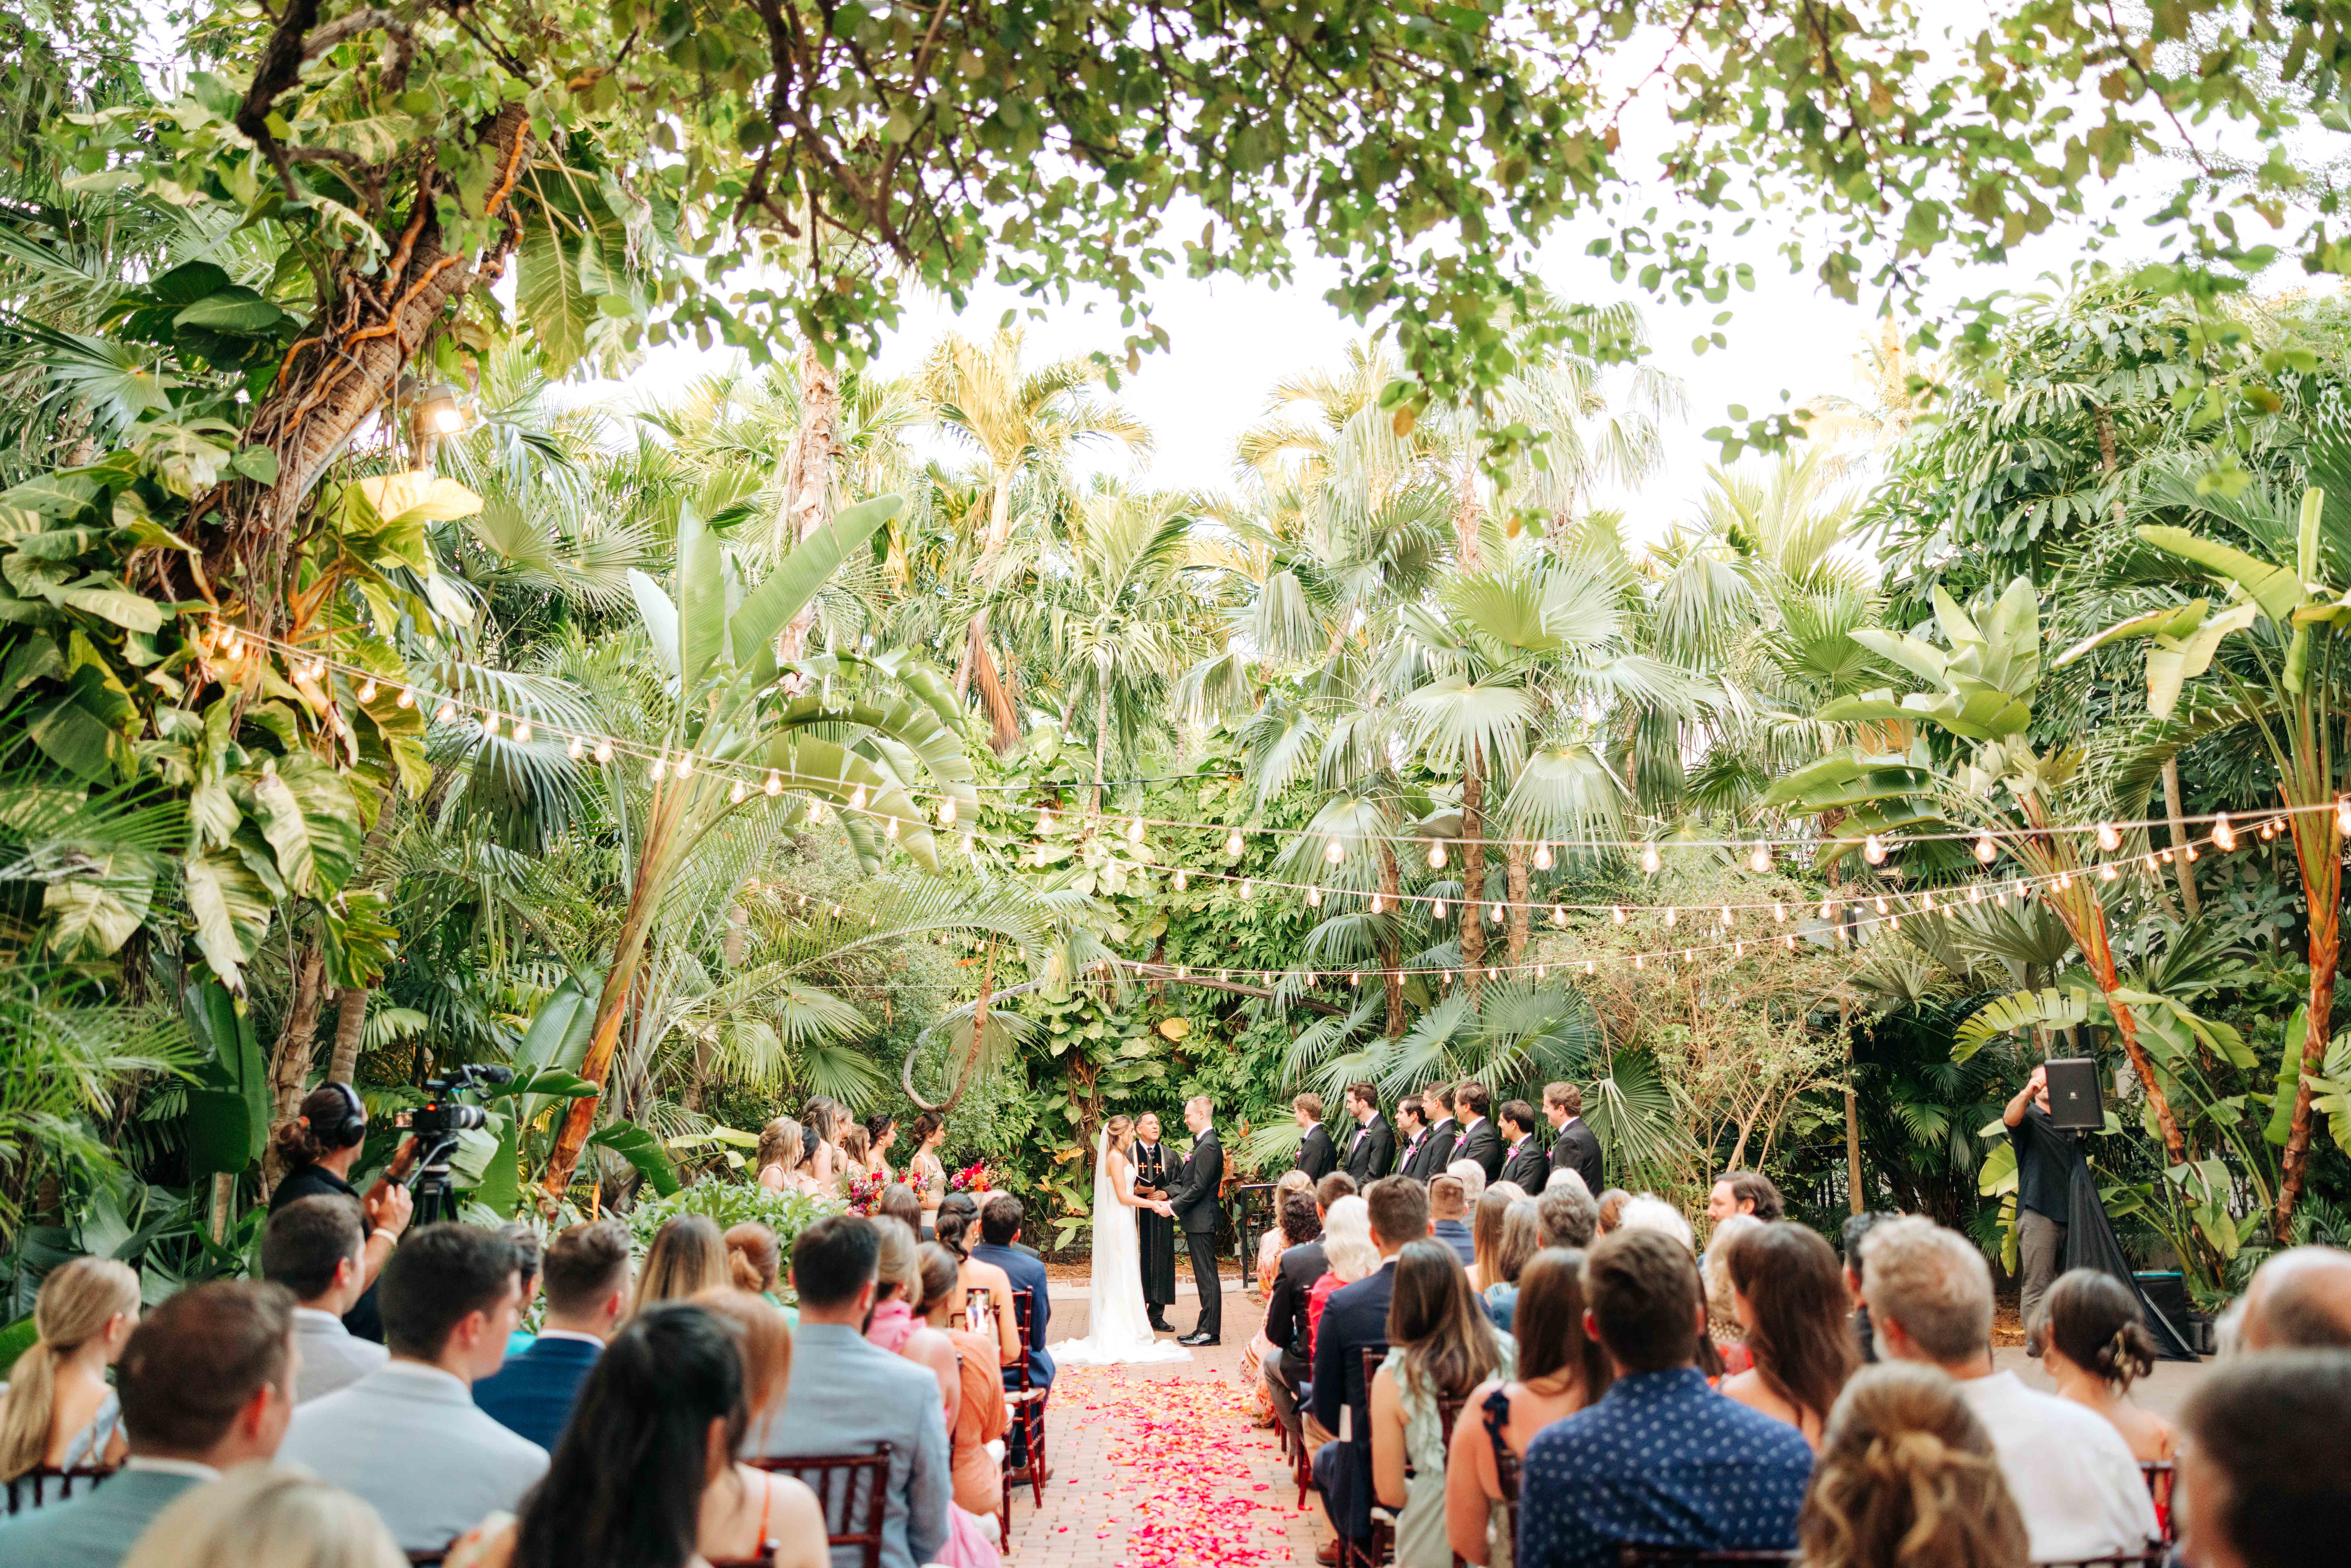 A wedding ceremony in the gardens of the Ernest Hemingway Home in Key West, Florida